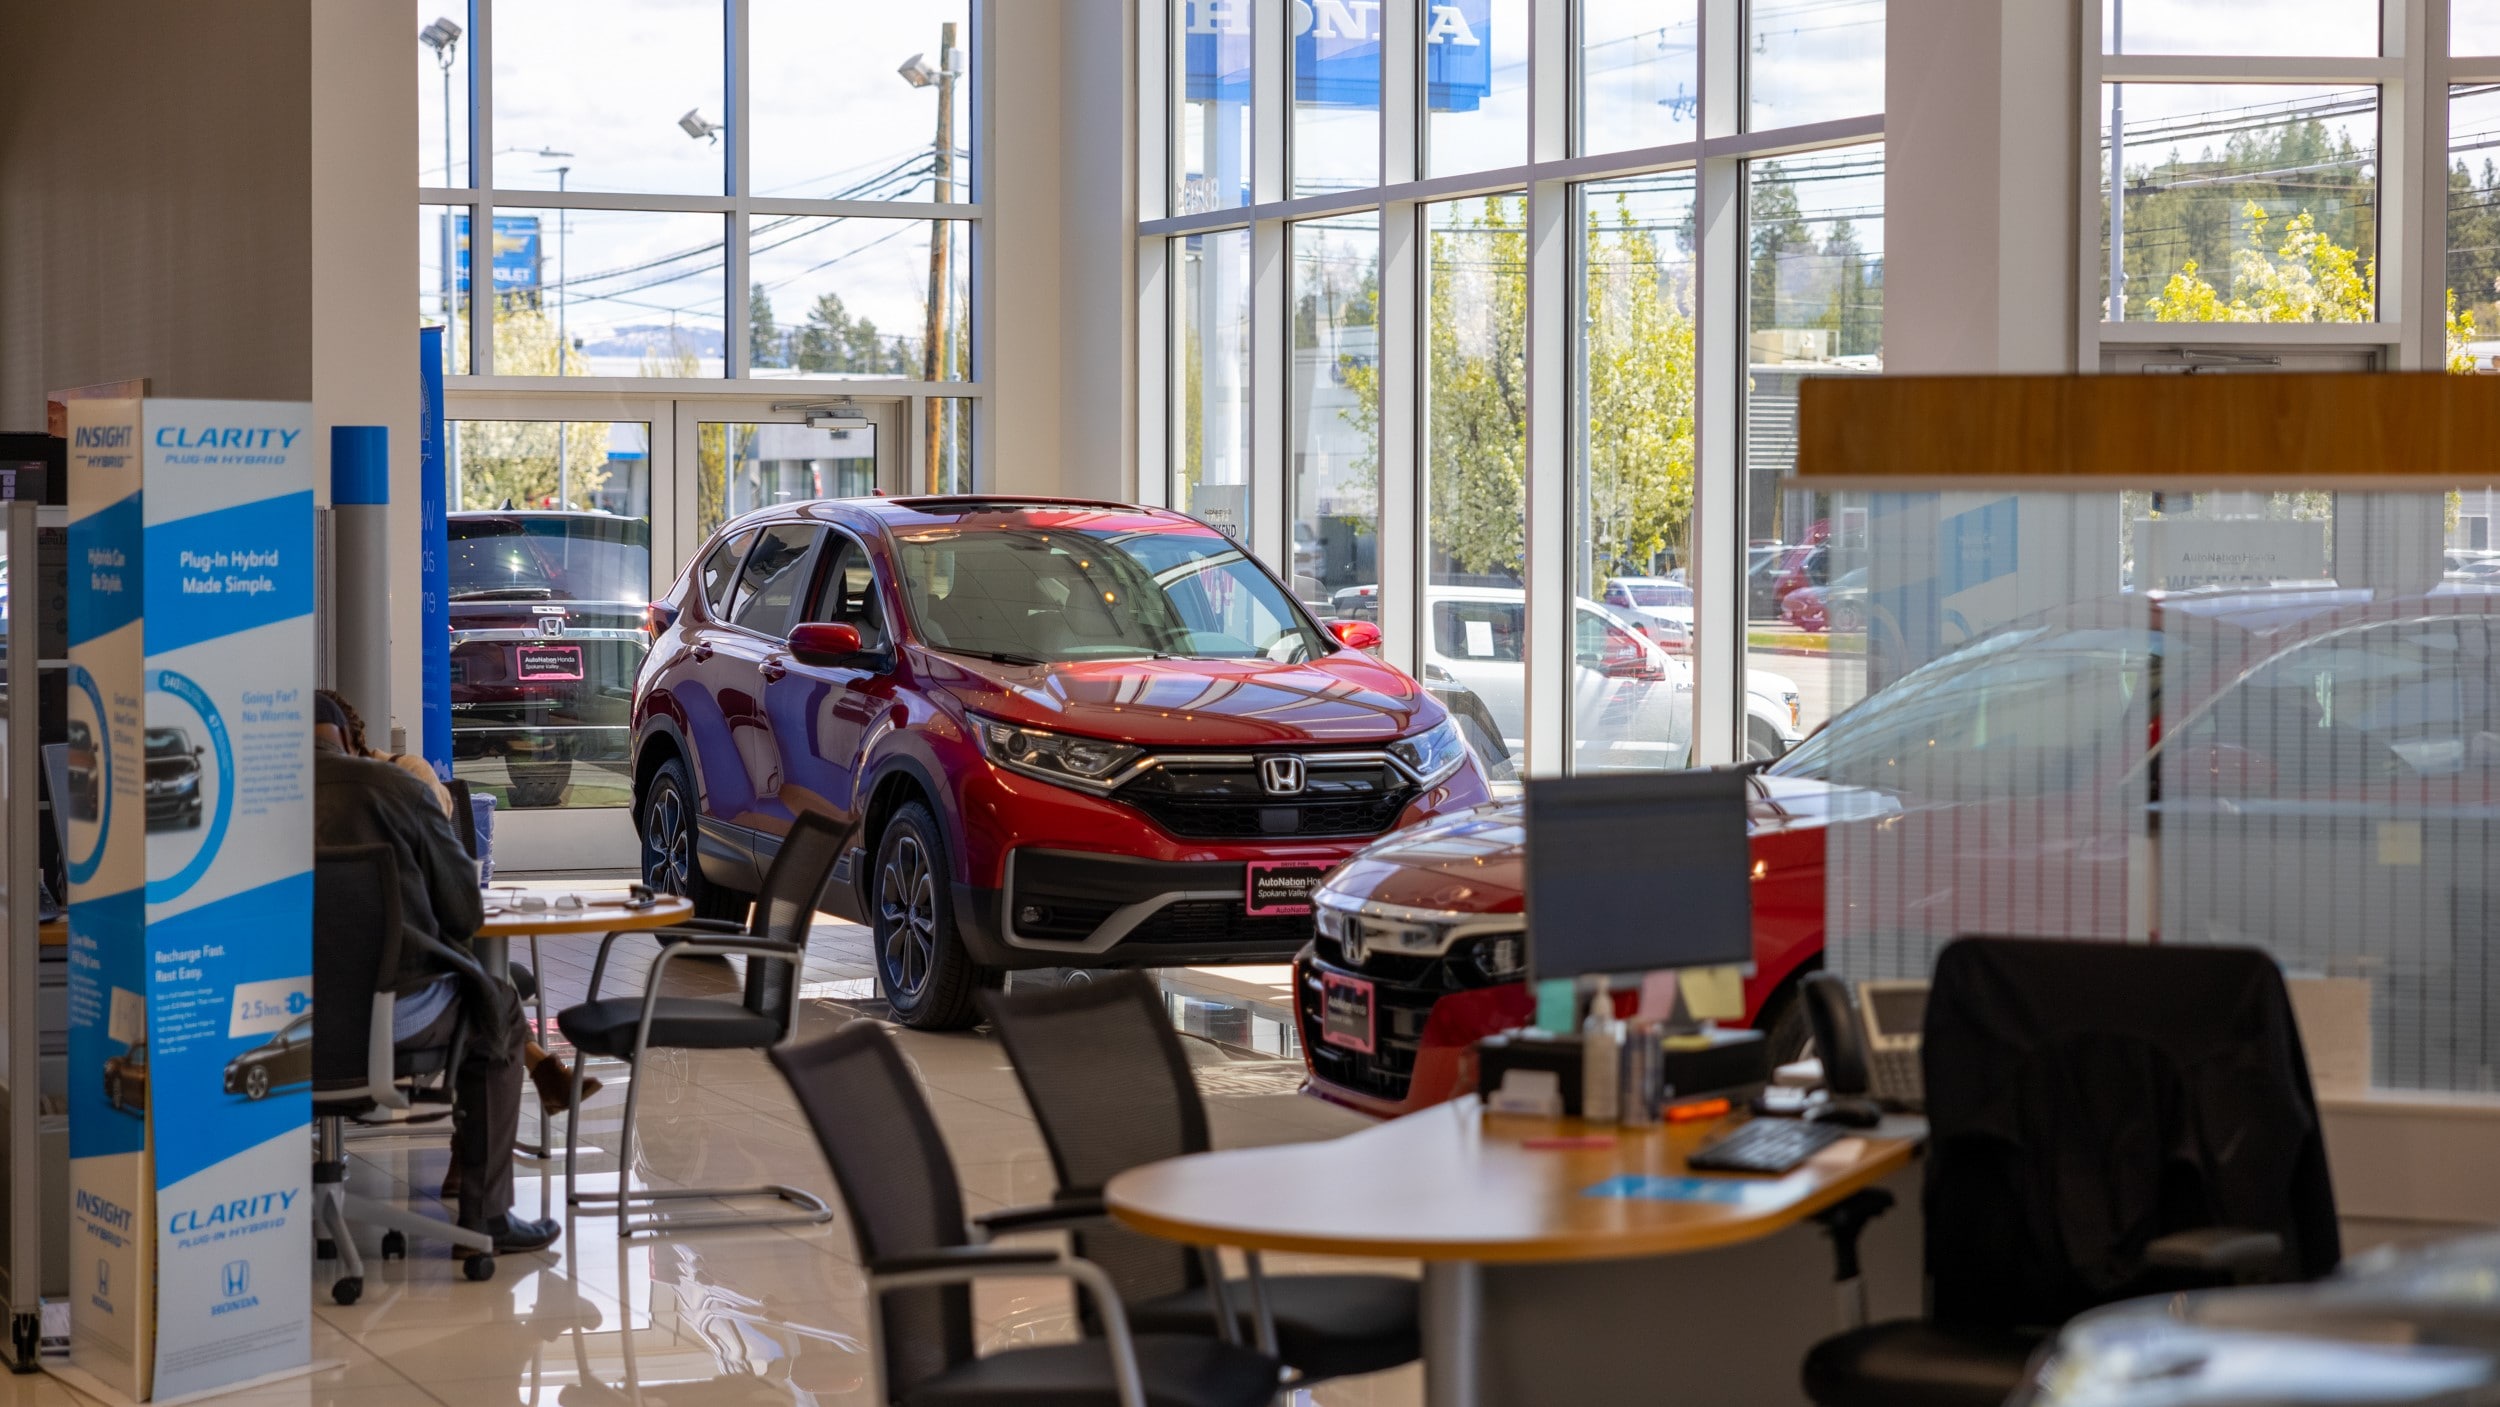 Interior view of [Dealership 
Name]. Red Honda parked near round table with chairs